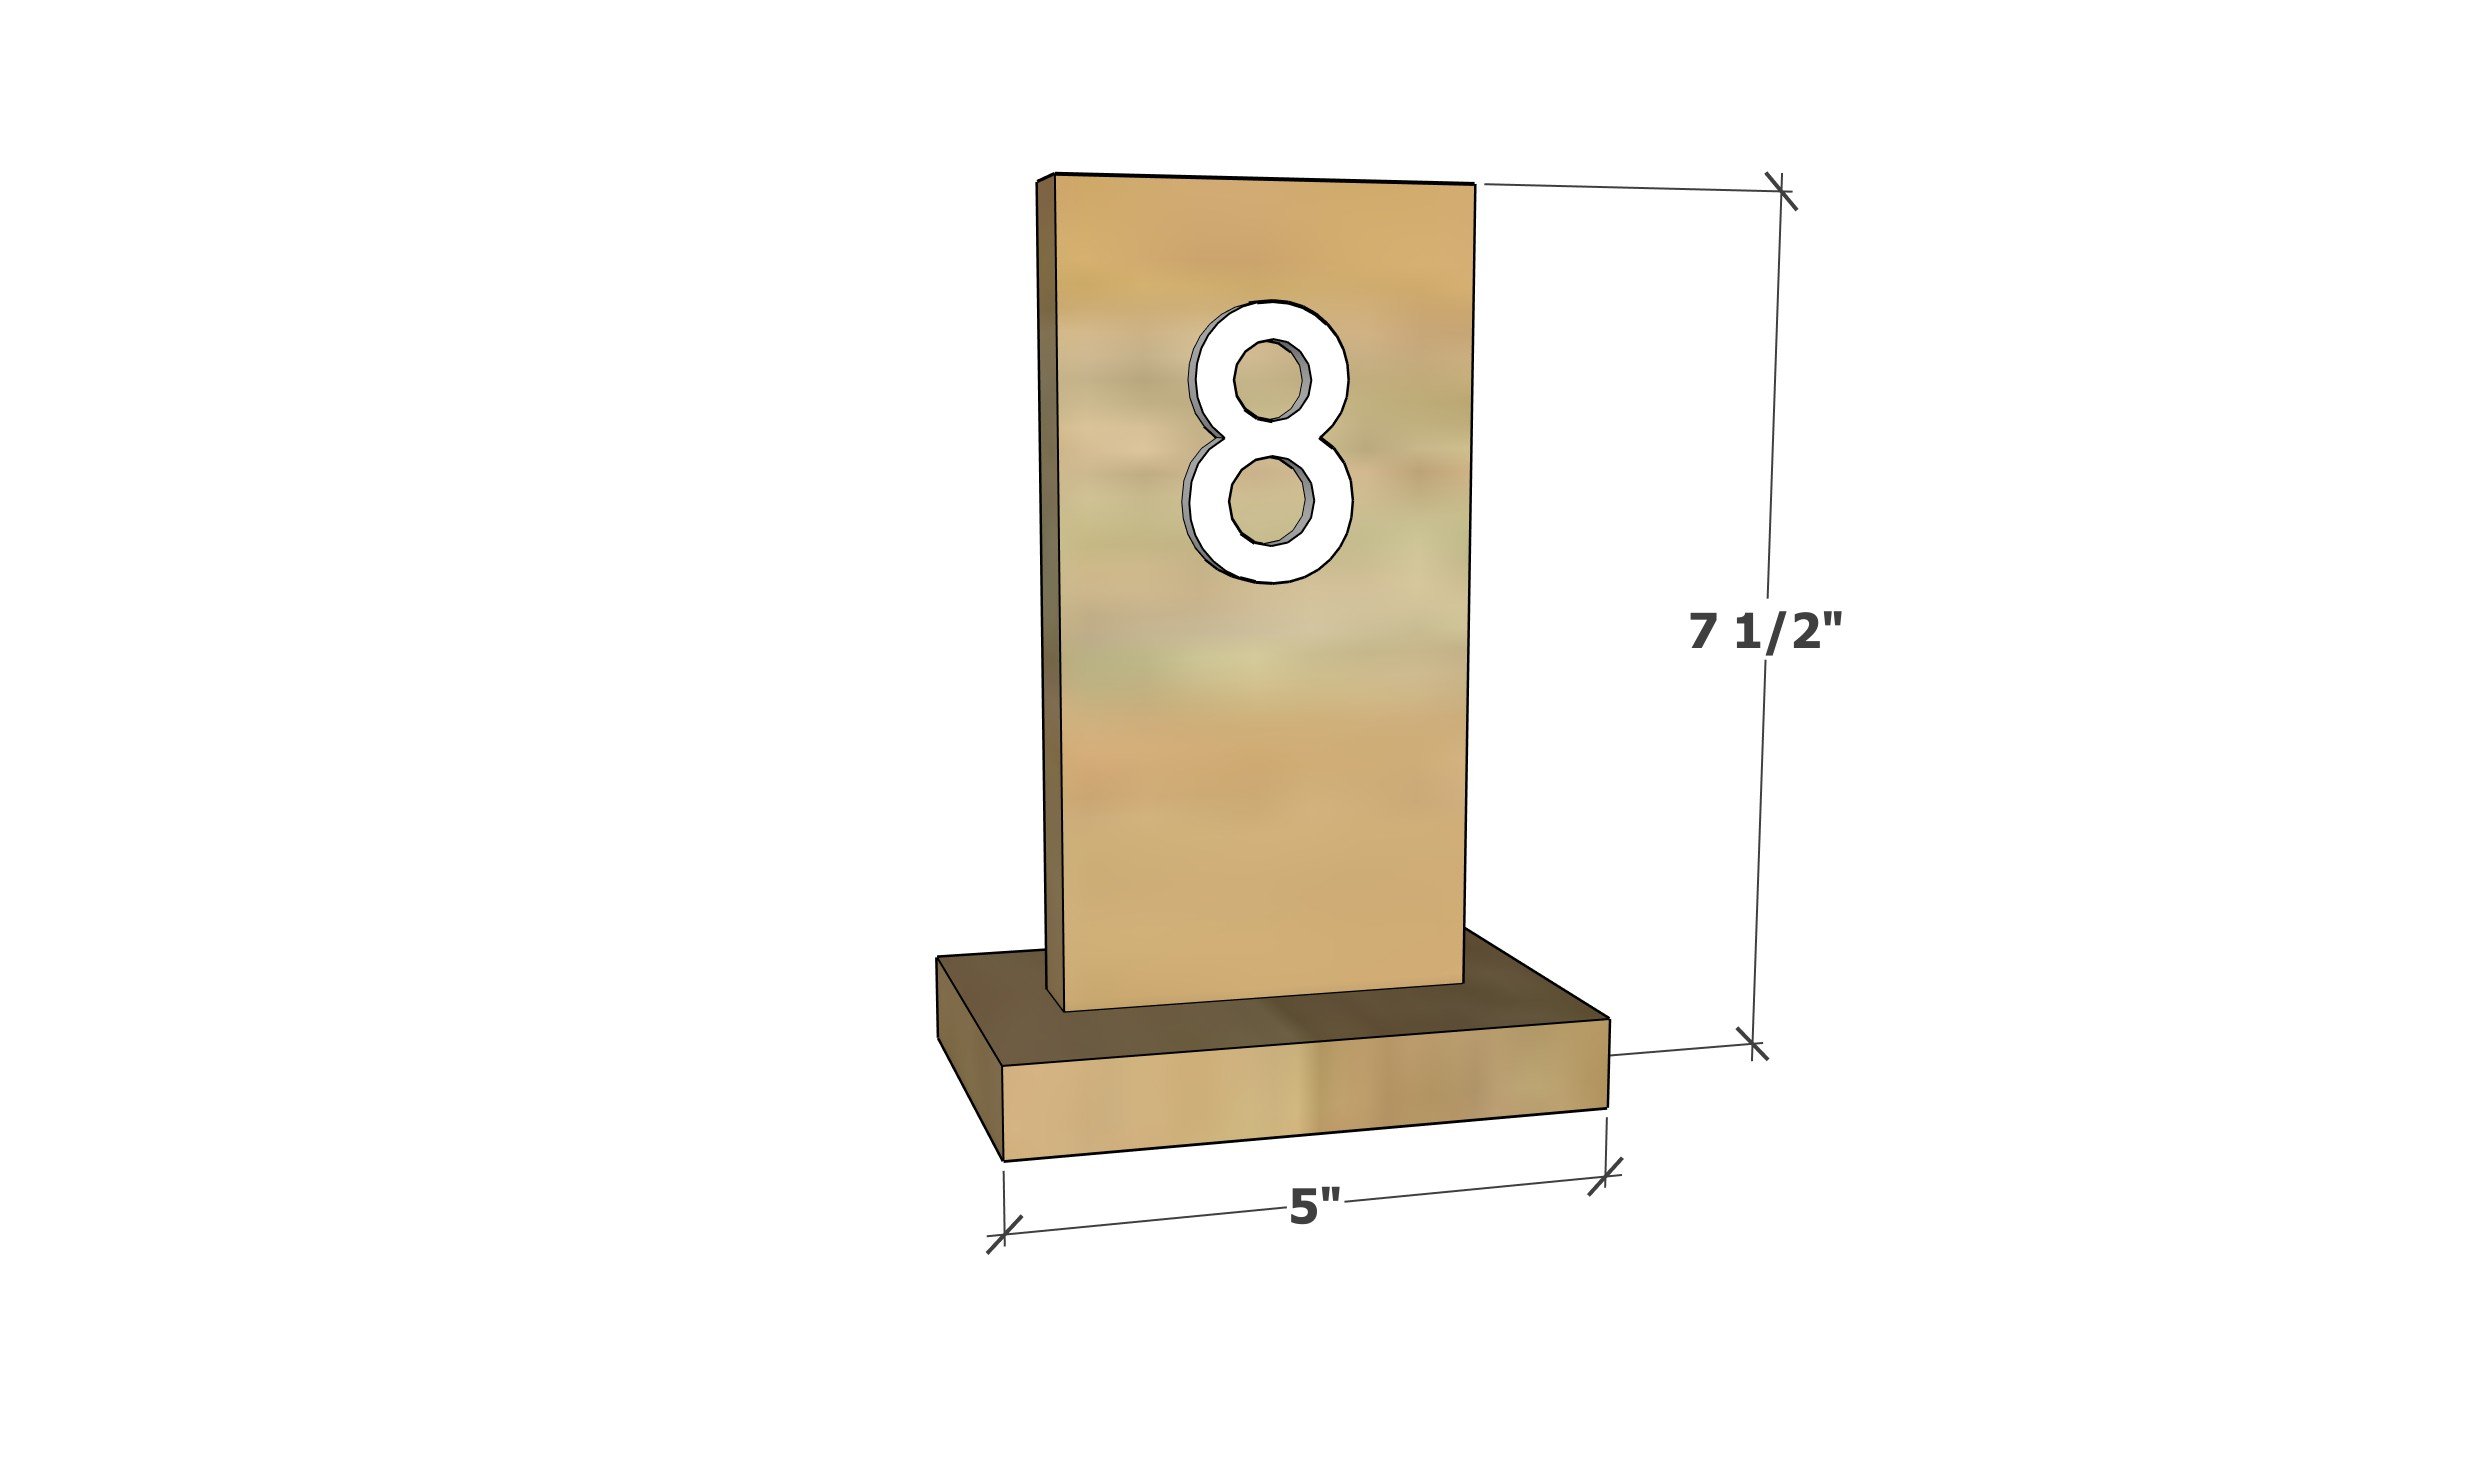 table number dimensions